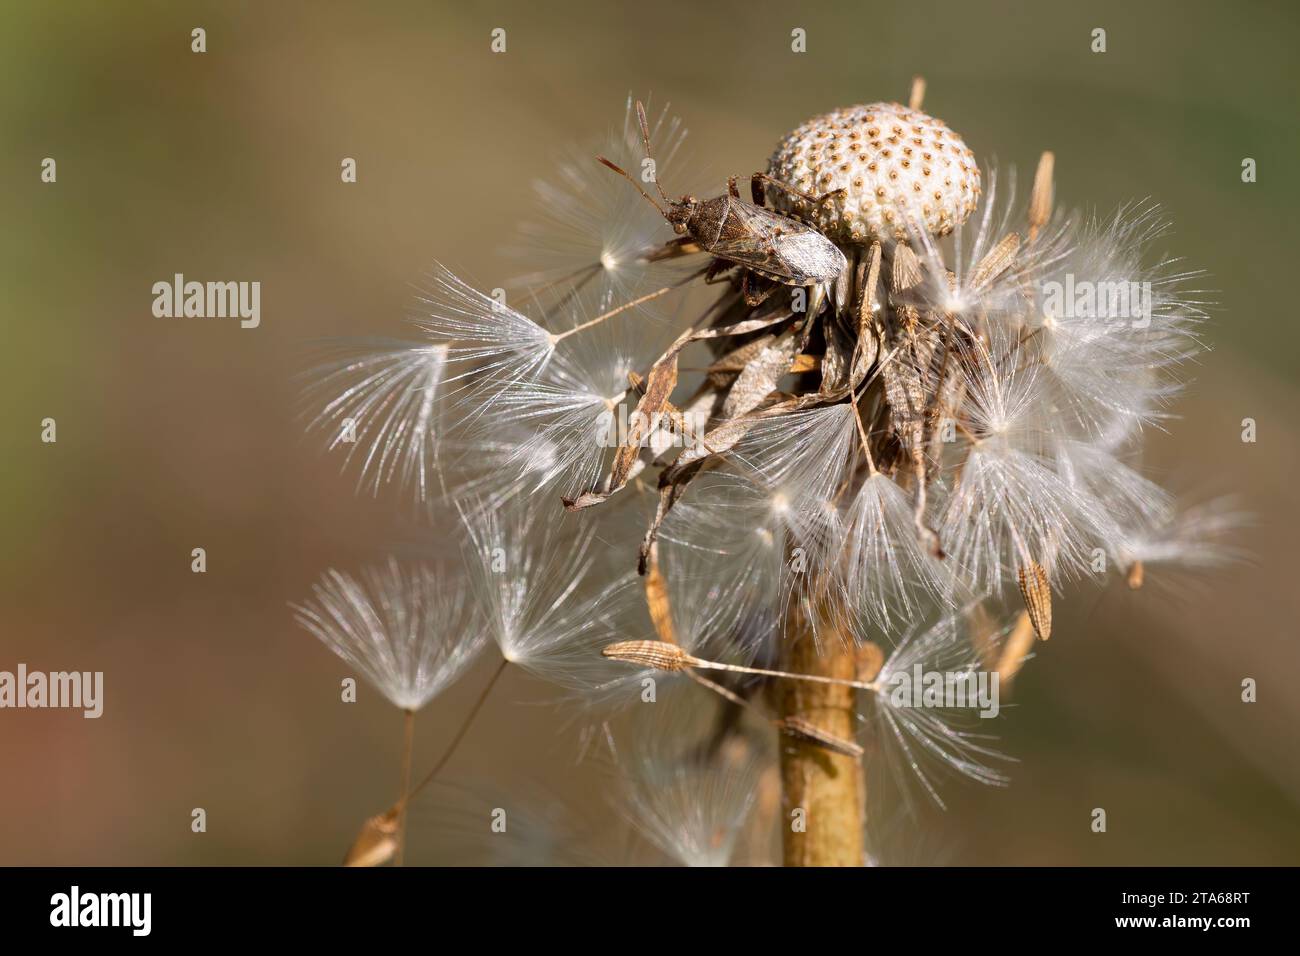 brown stink bug perched on a dried dandelion. horizontal macrophotography in pastel tones. Copy Space. Stock Photo